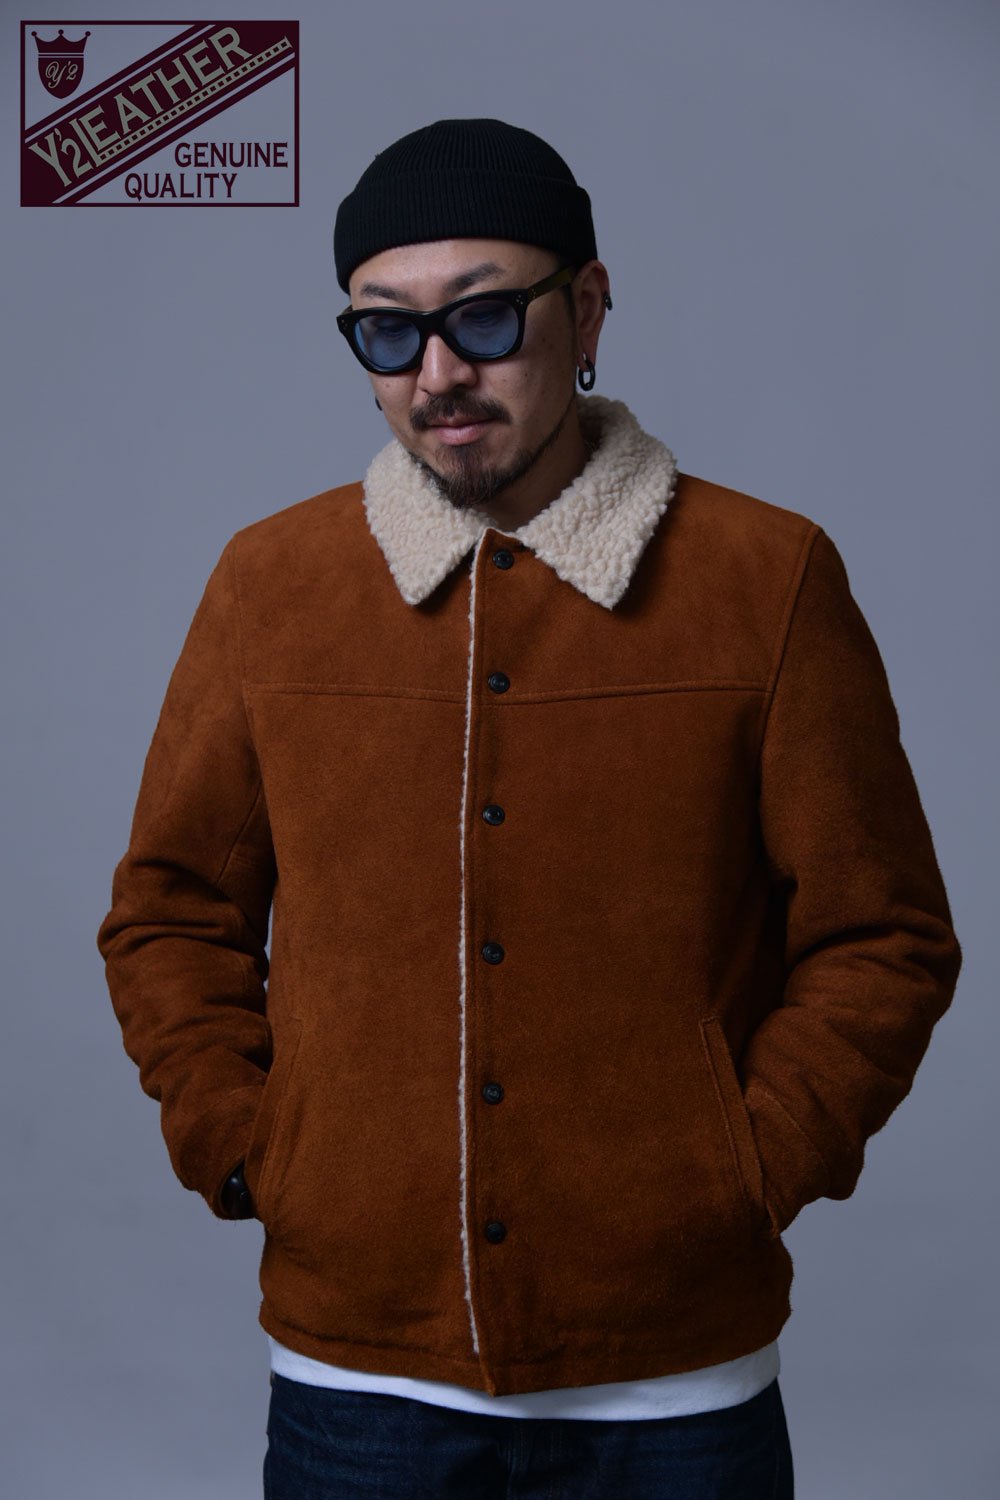 Y'2 LEATHER(ワイツーレザー) レザージャケット STEER SUEDE LUNCH COAT WJ-02 通販正規取扱 |  ハーレムストア公式通販サイト